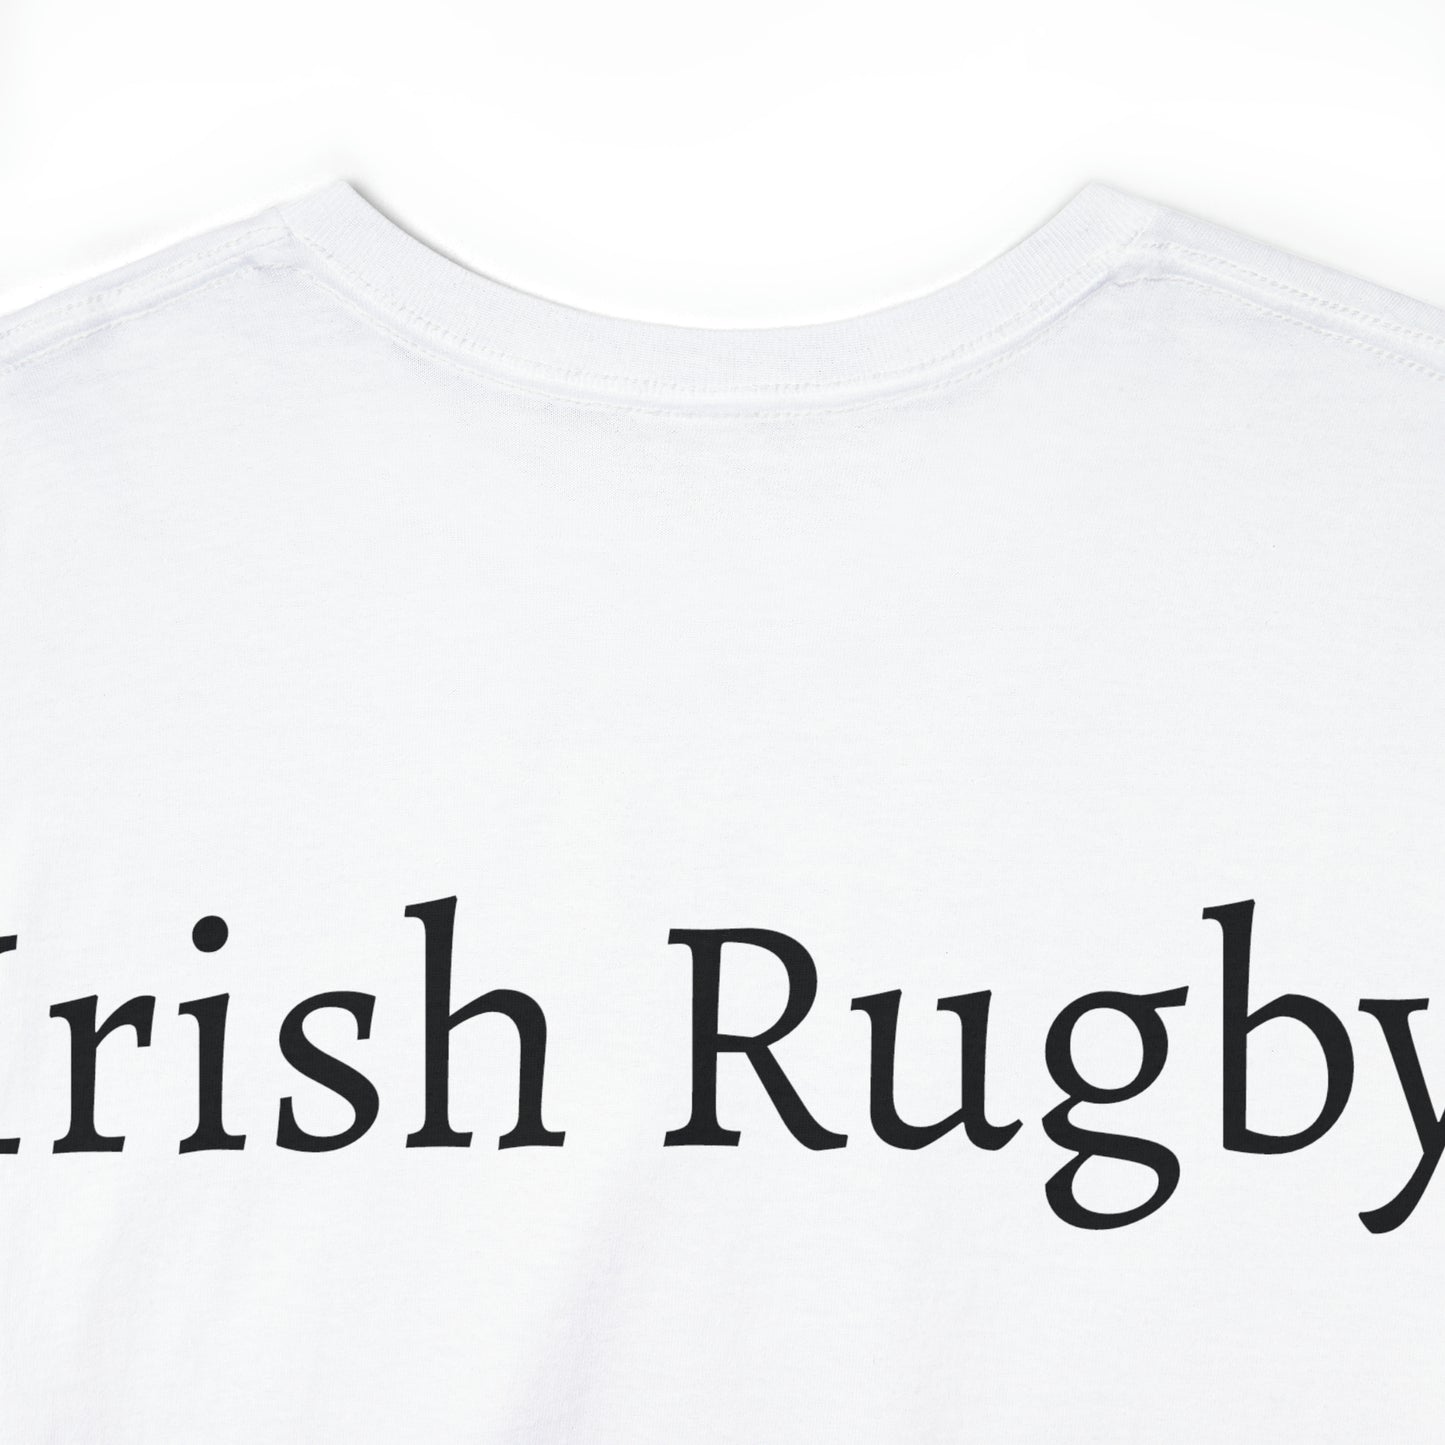 Conor Rugby - light shirts